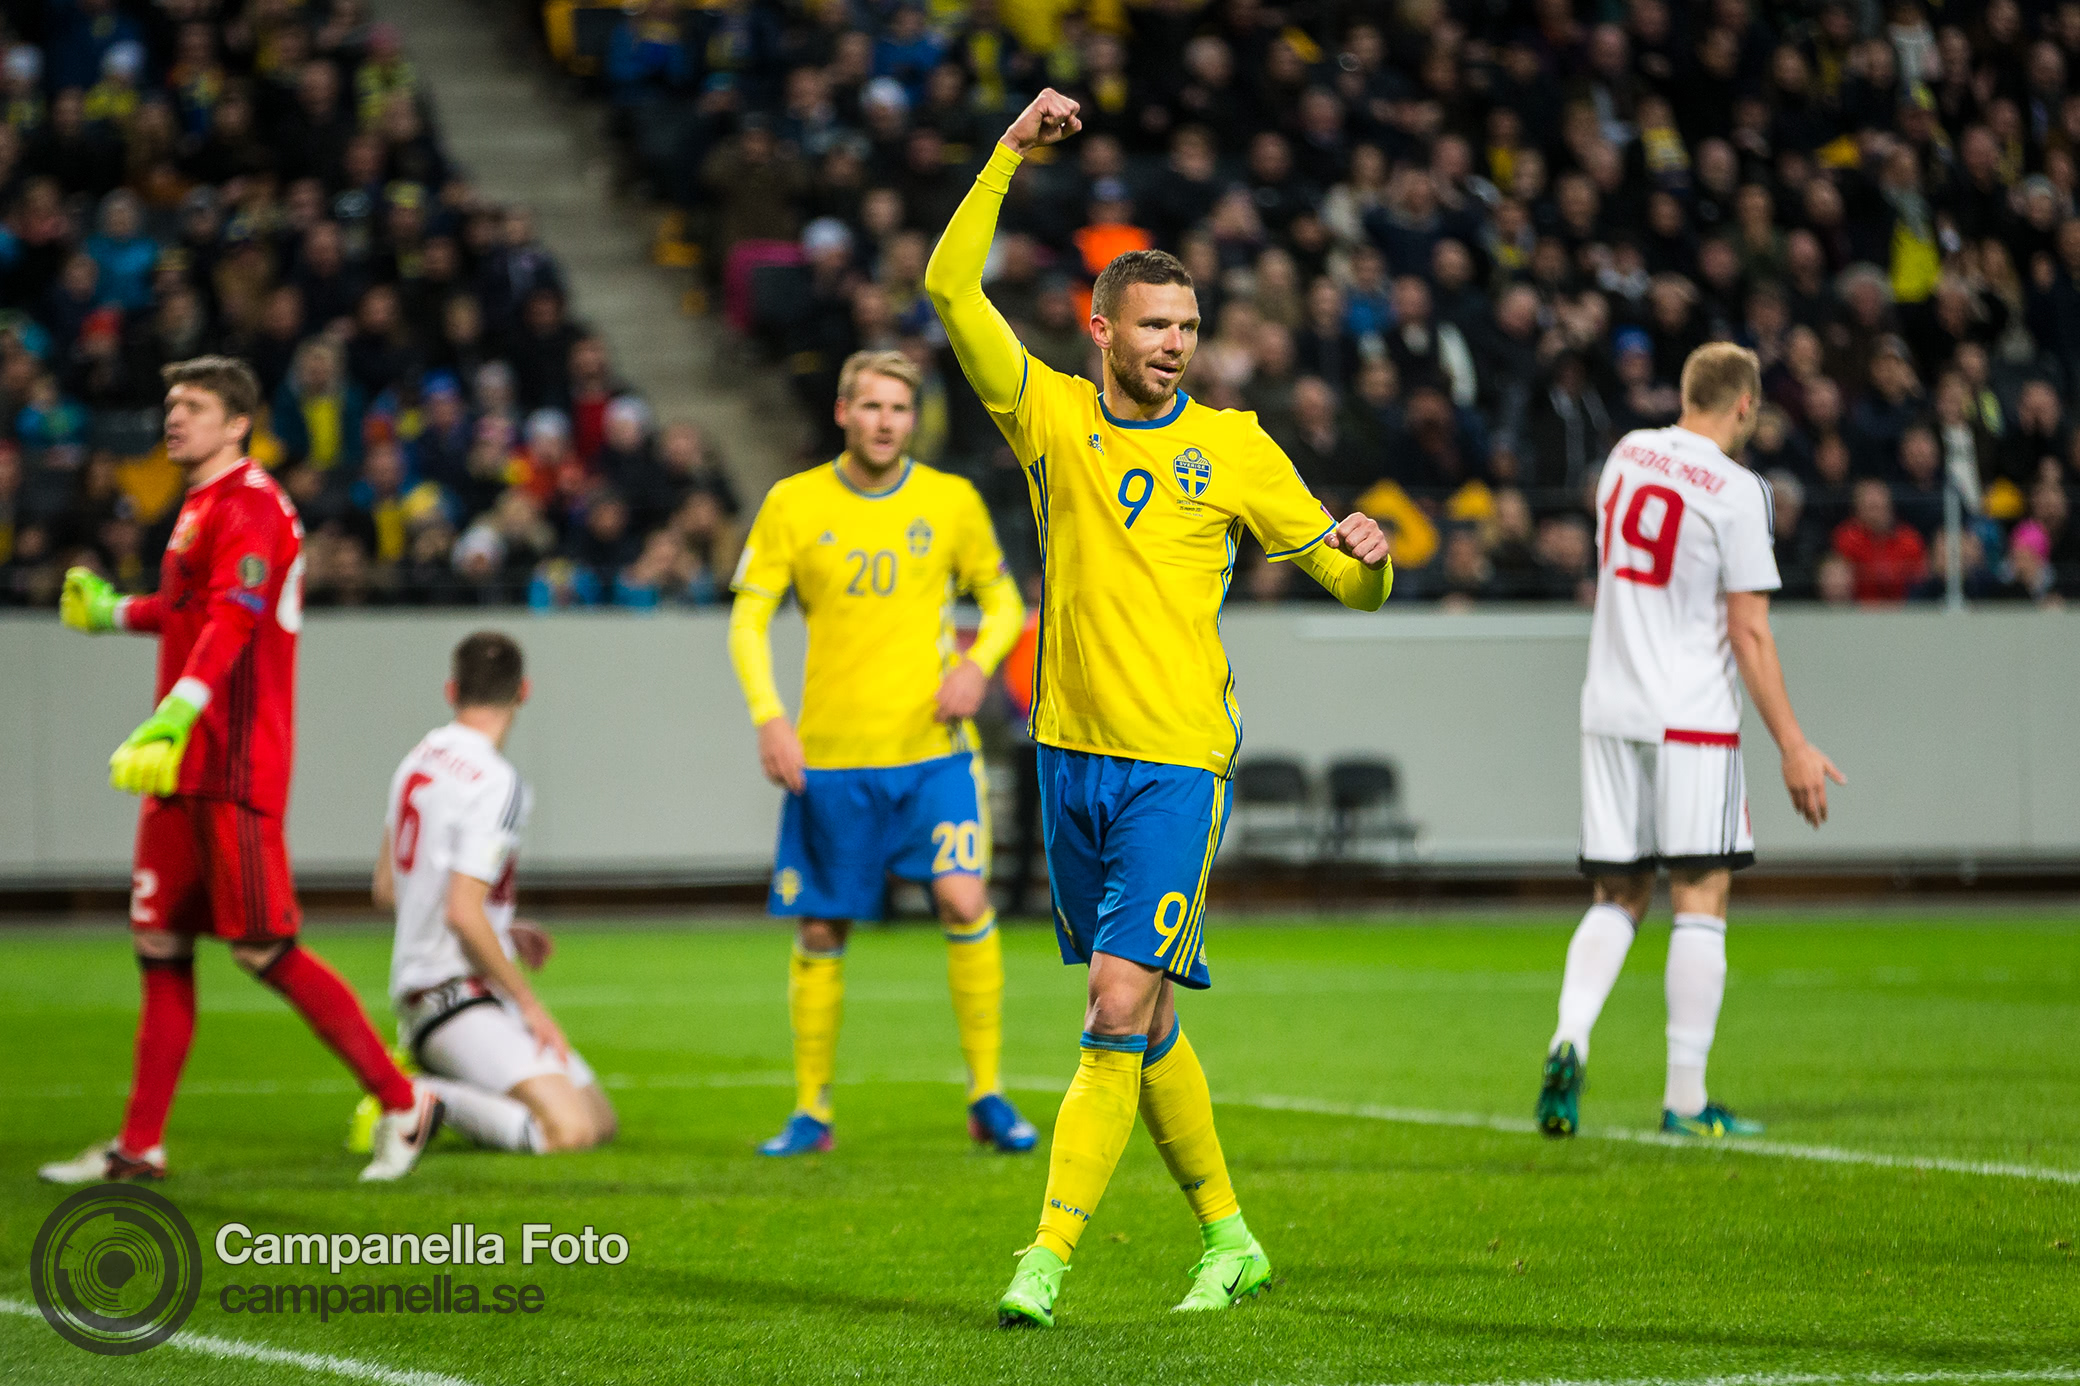 Sweden easily disposes Belarus in 4-0 victory - Michael Campanella Photography